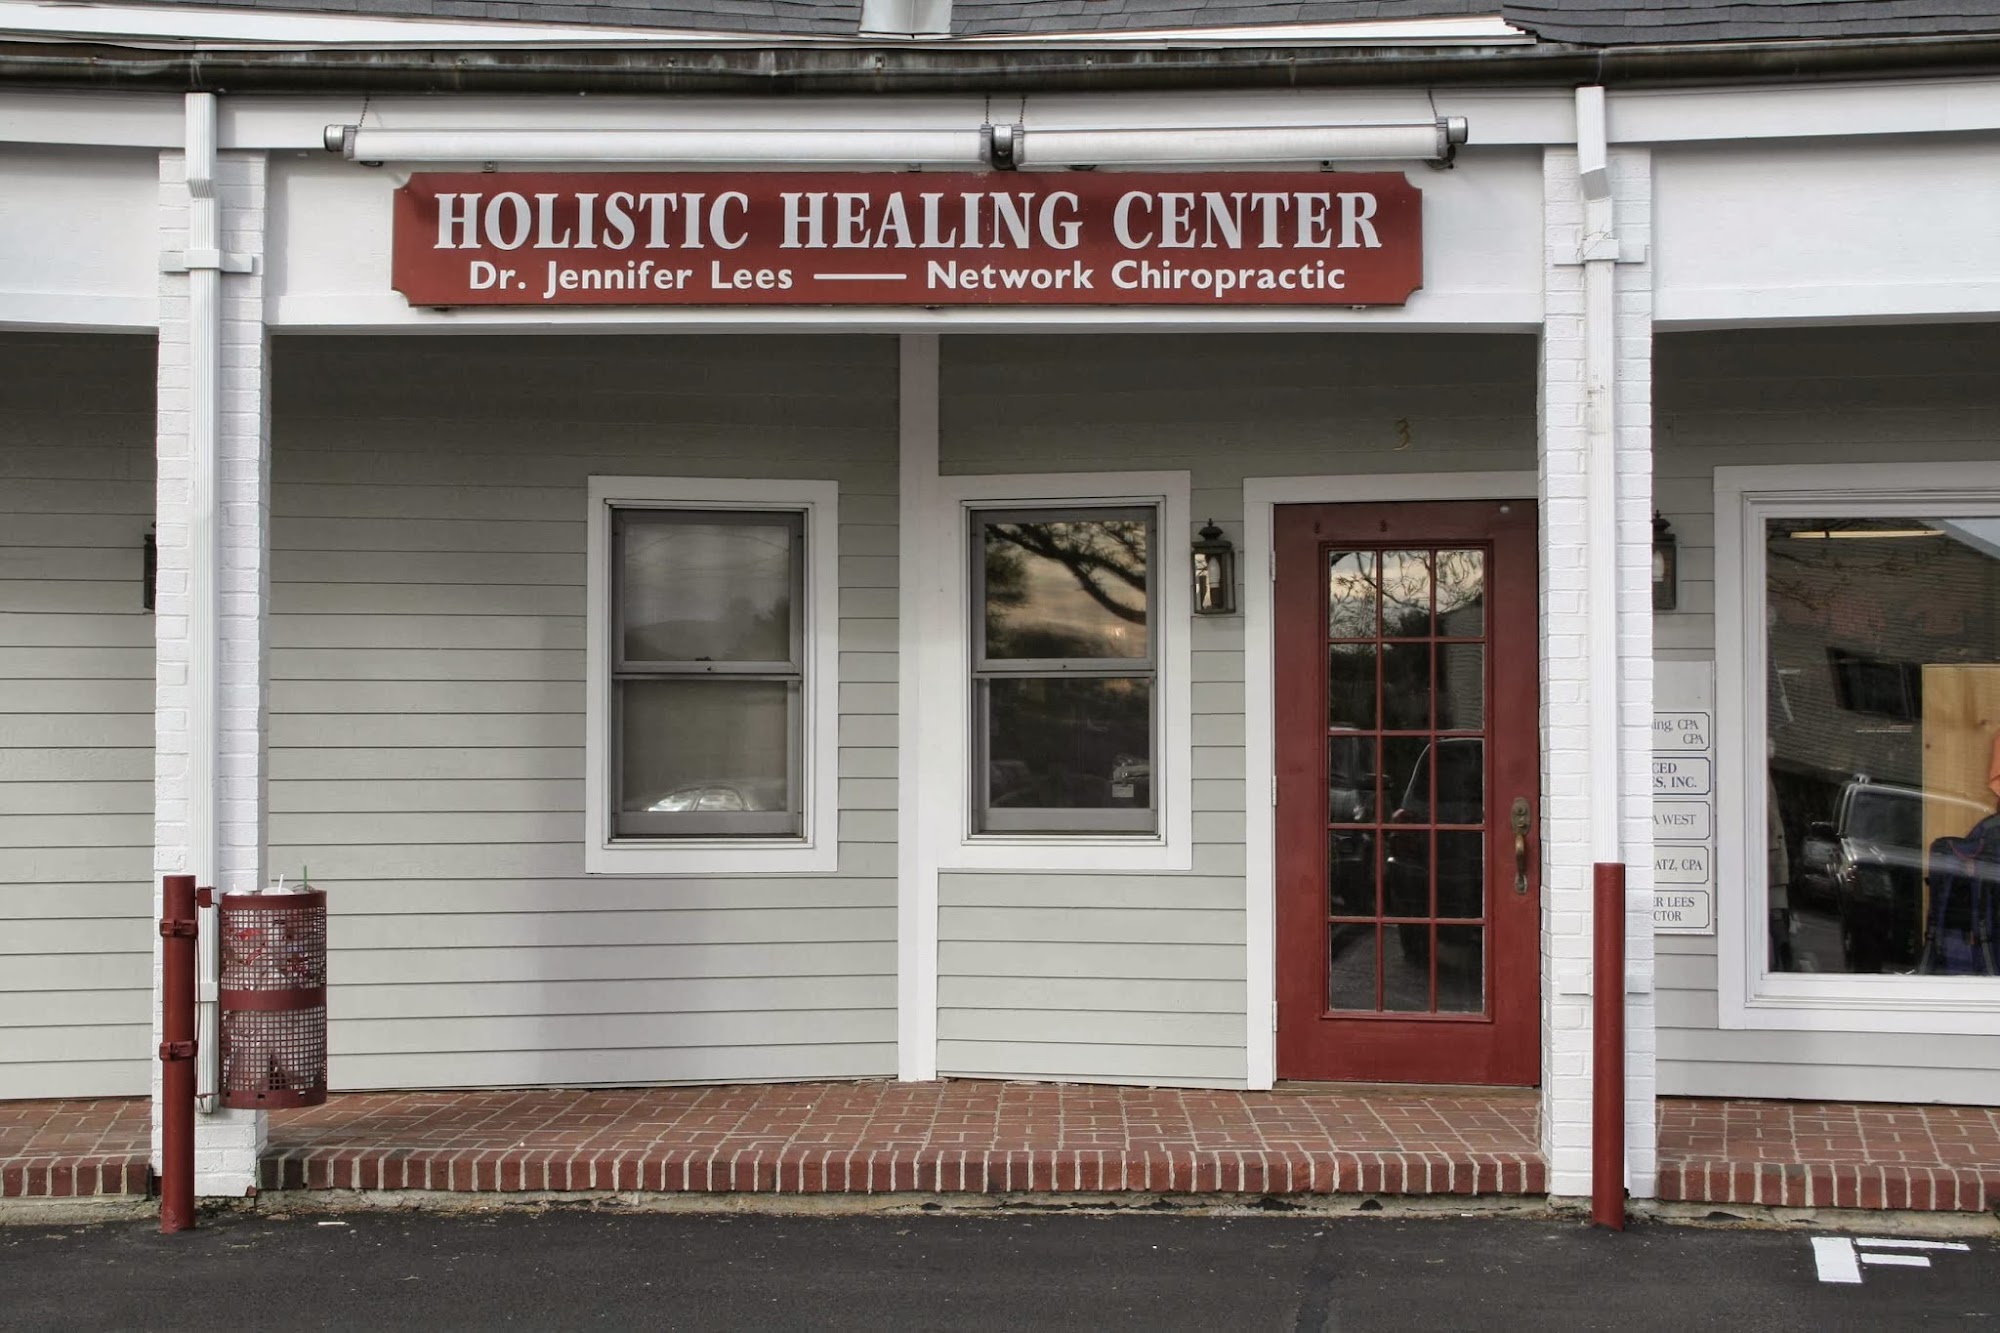 Holistic Healing Center For Network Chiropractic